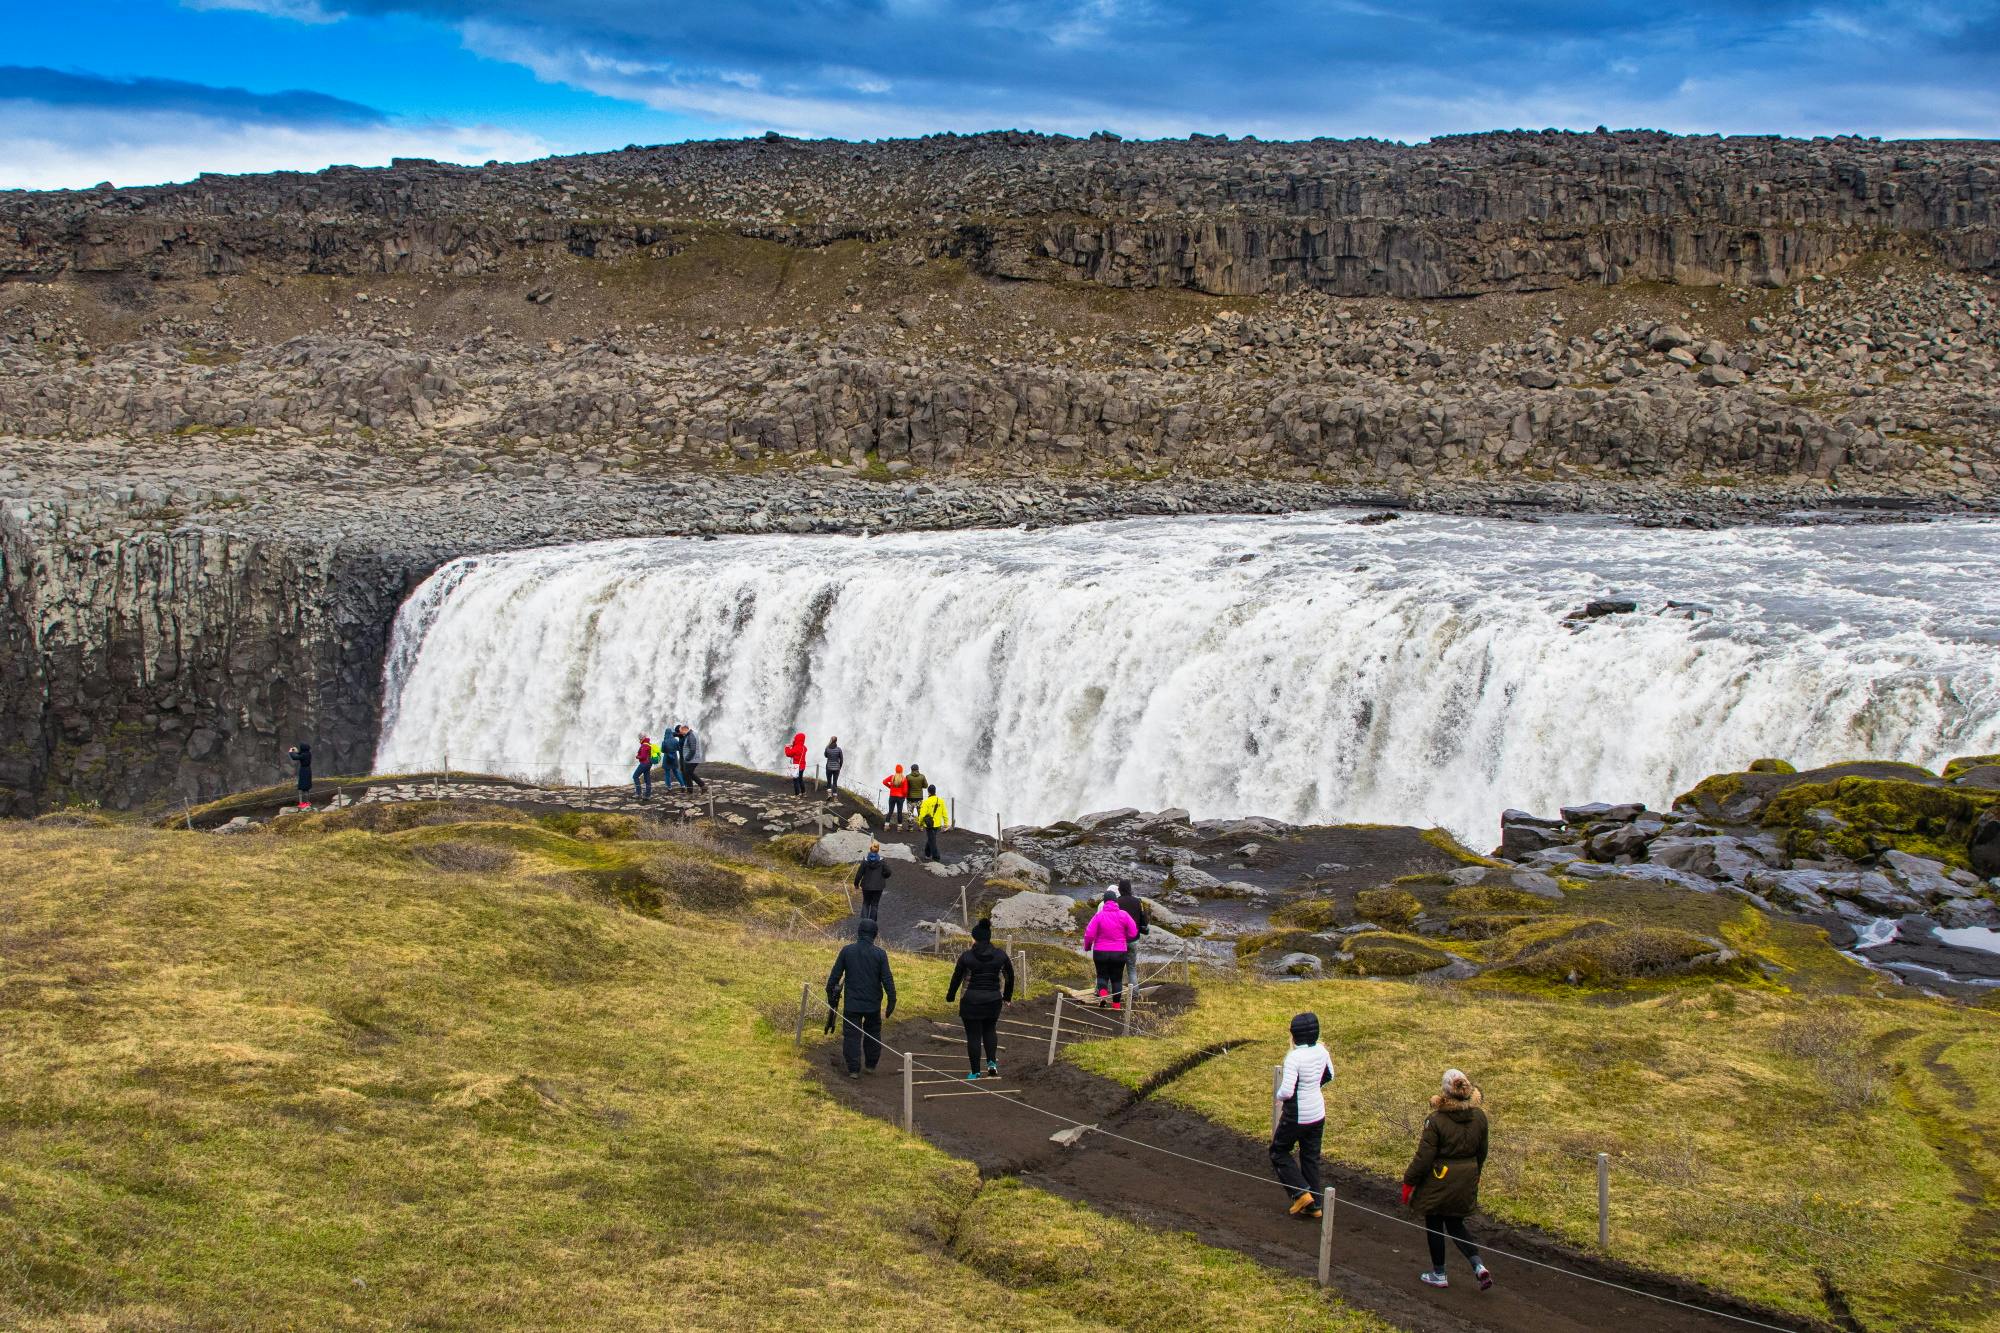 travel planning for iceland